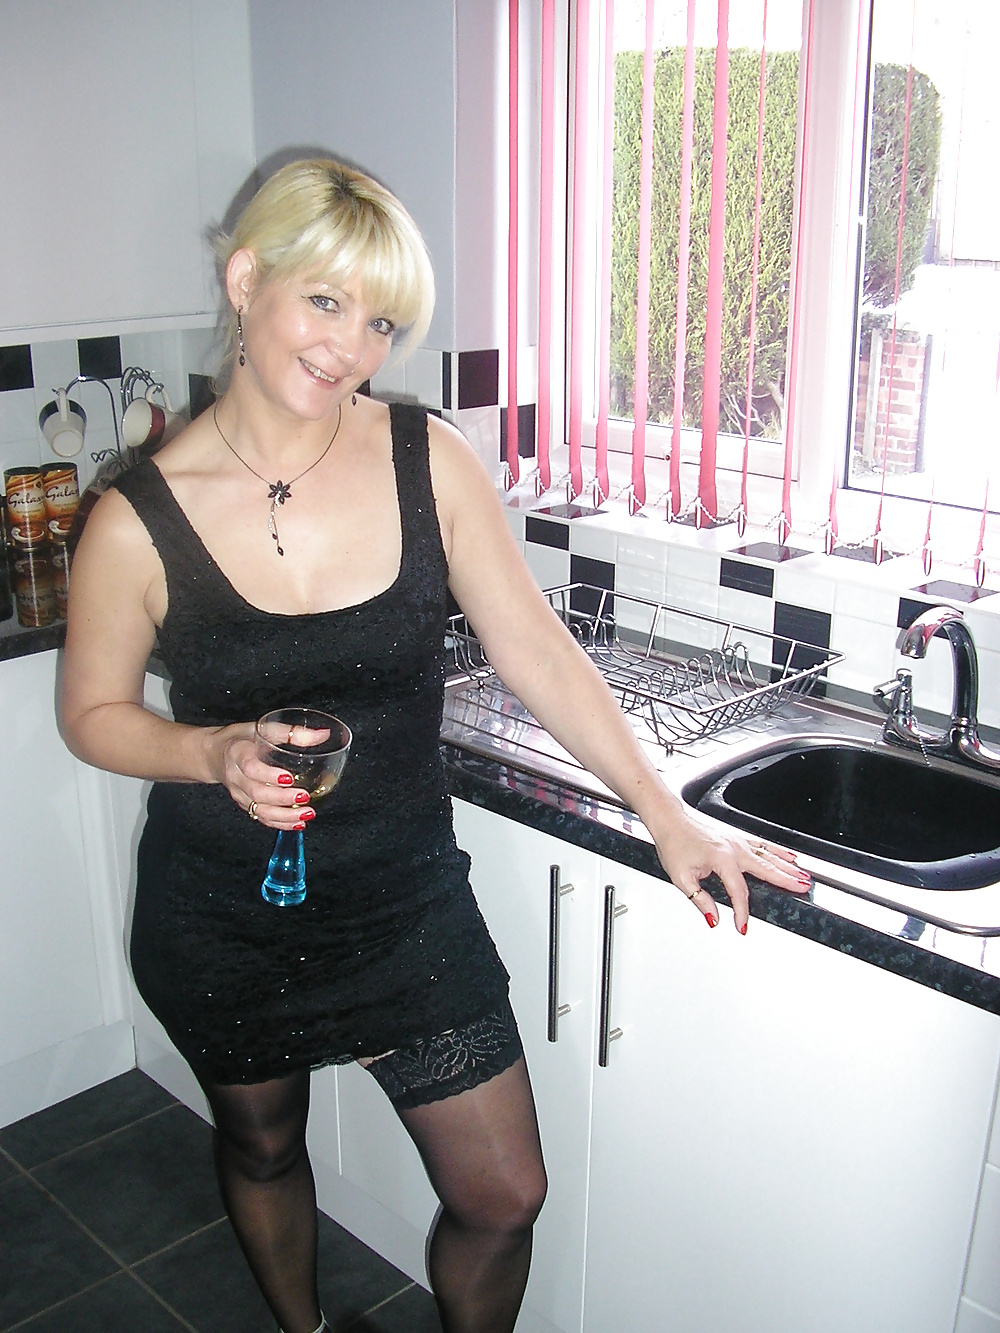 Lincs lou milf,dressed and undressed #30018963